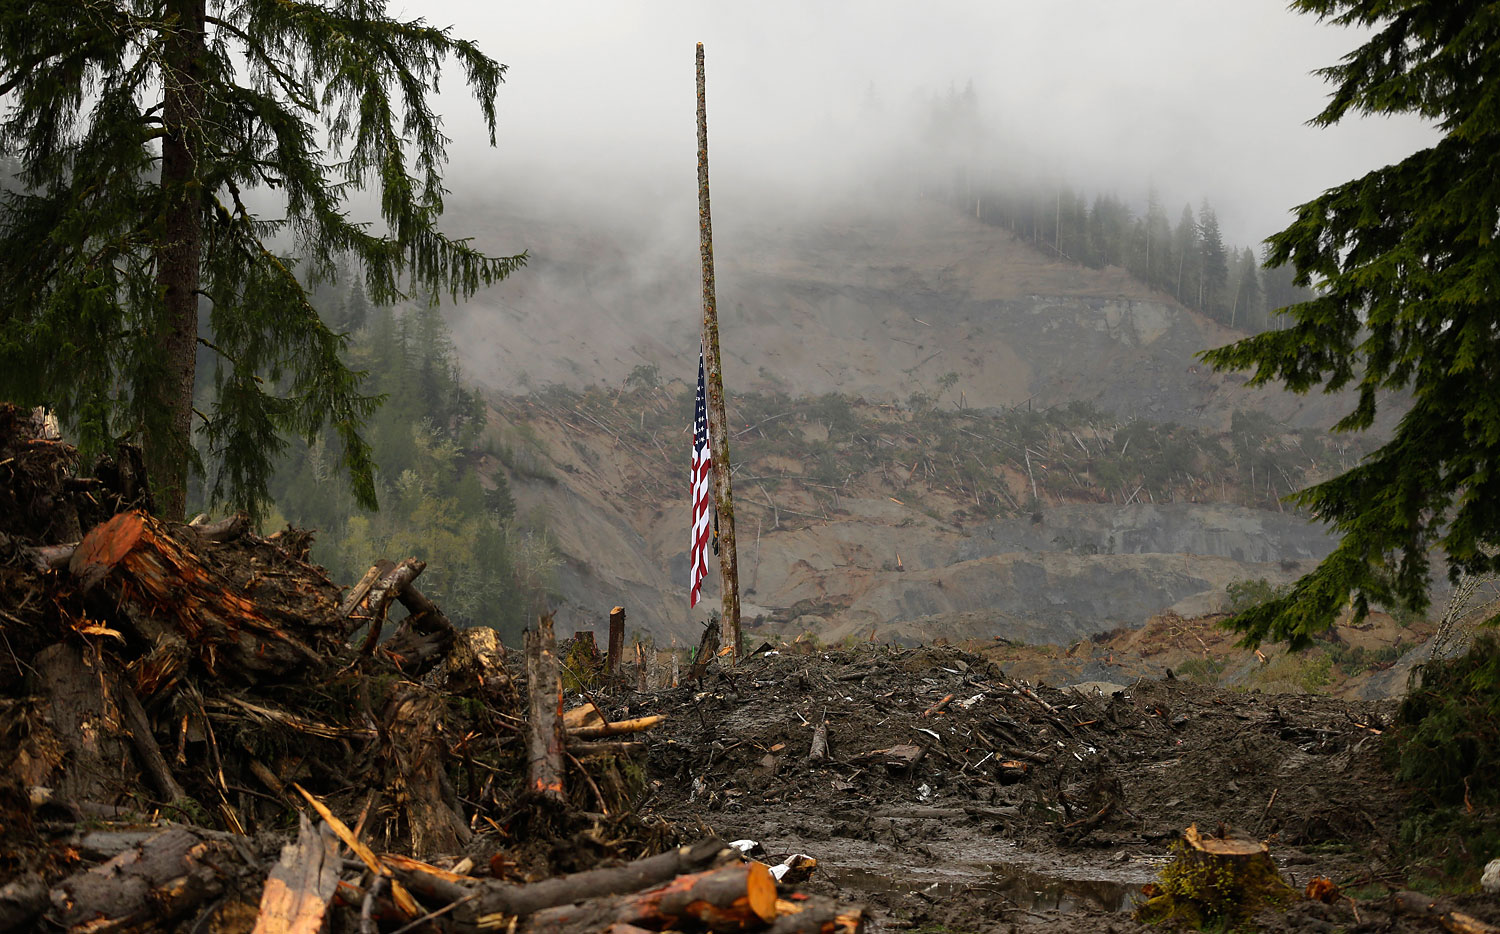 A flag rests at half staff on a cedar pole, Wednesday, April 16, 2014, with the face of the massive deadly mudslide that hit the community of Oso, Wash. on March 22, 2014 behind it. (Ted S. Warren—AP)